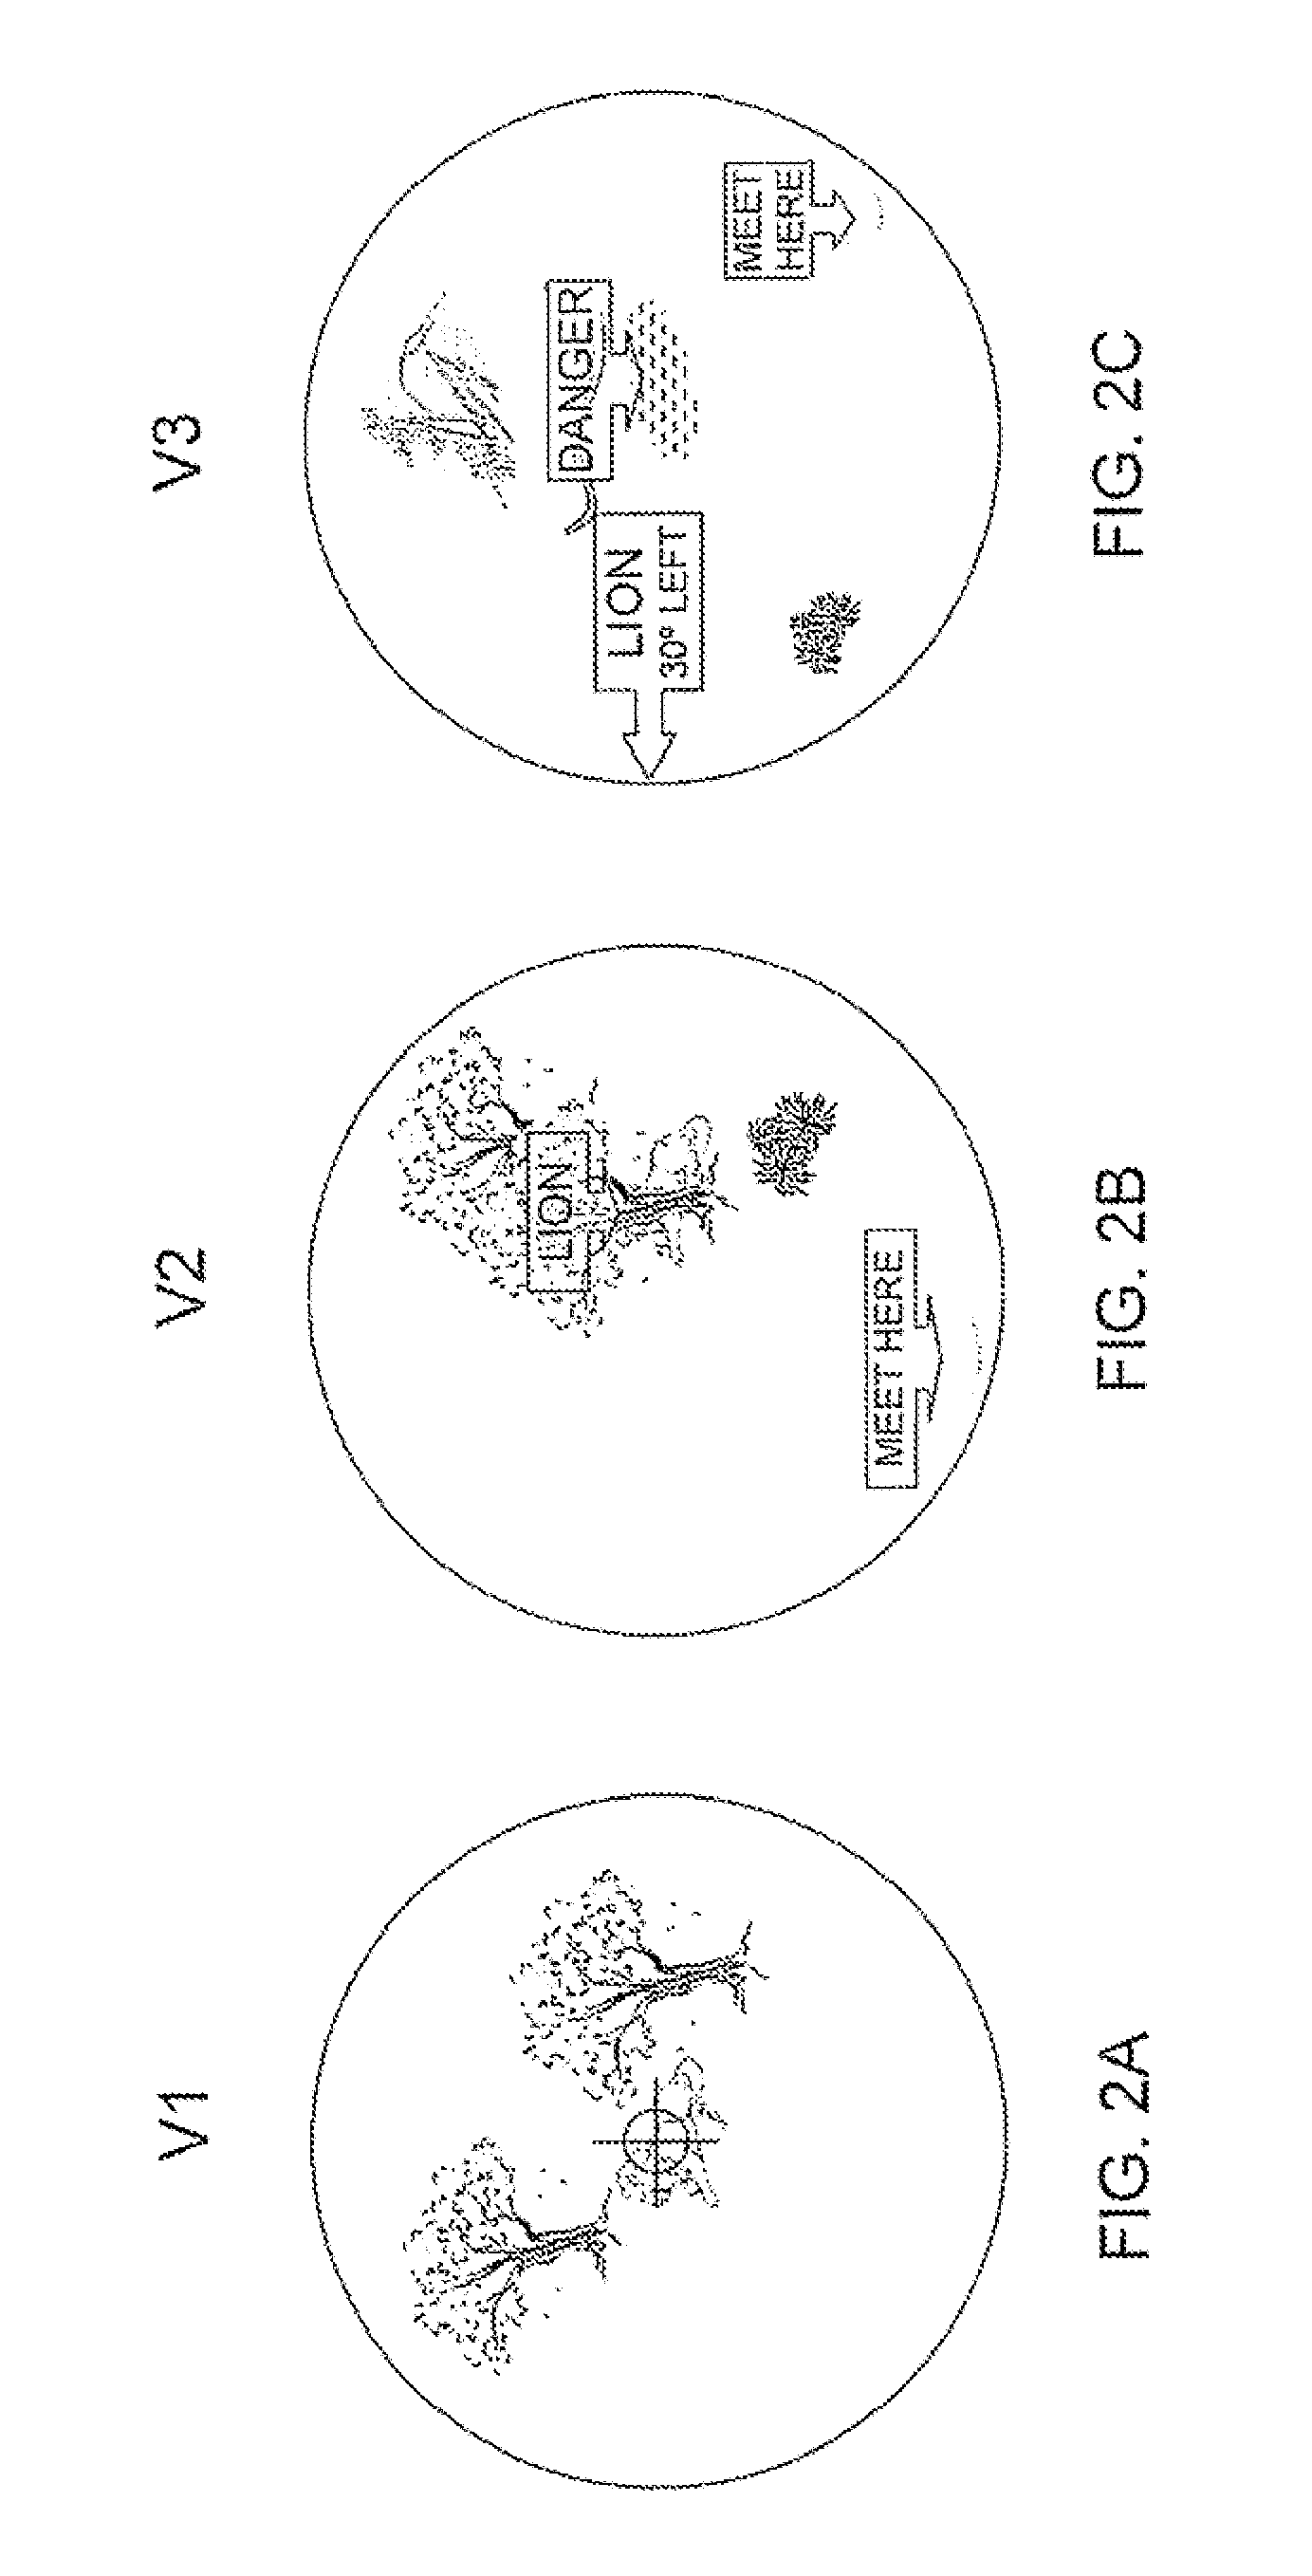 Real-time geographic information system and method